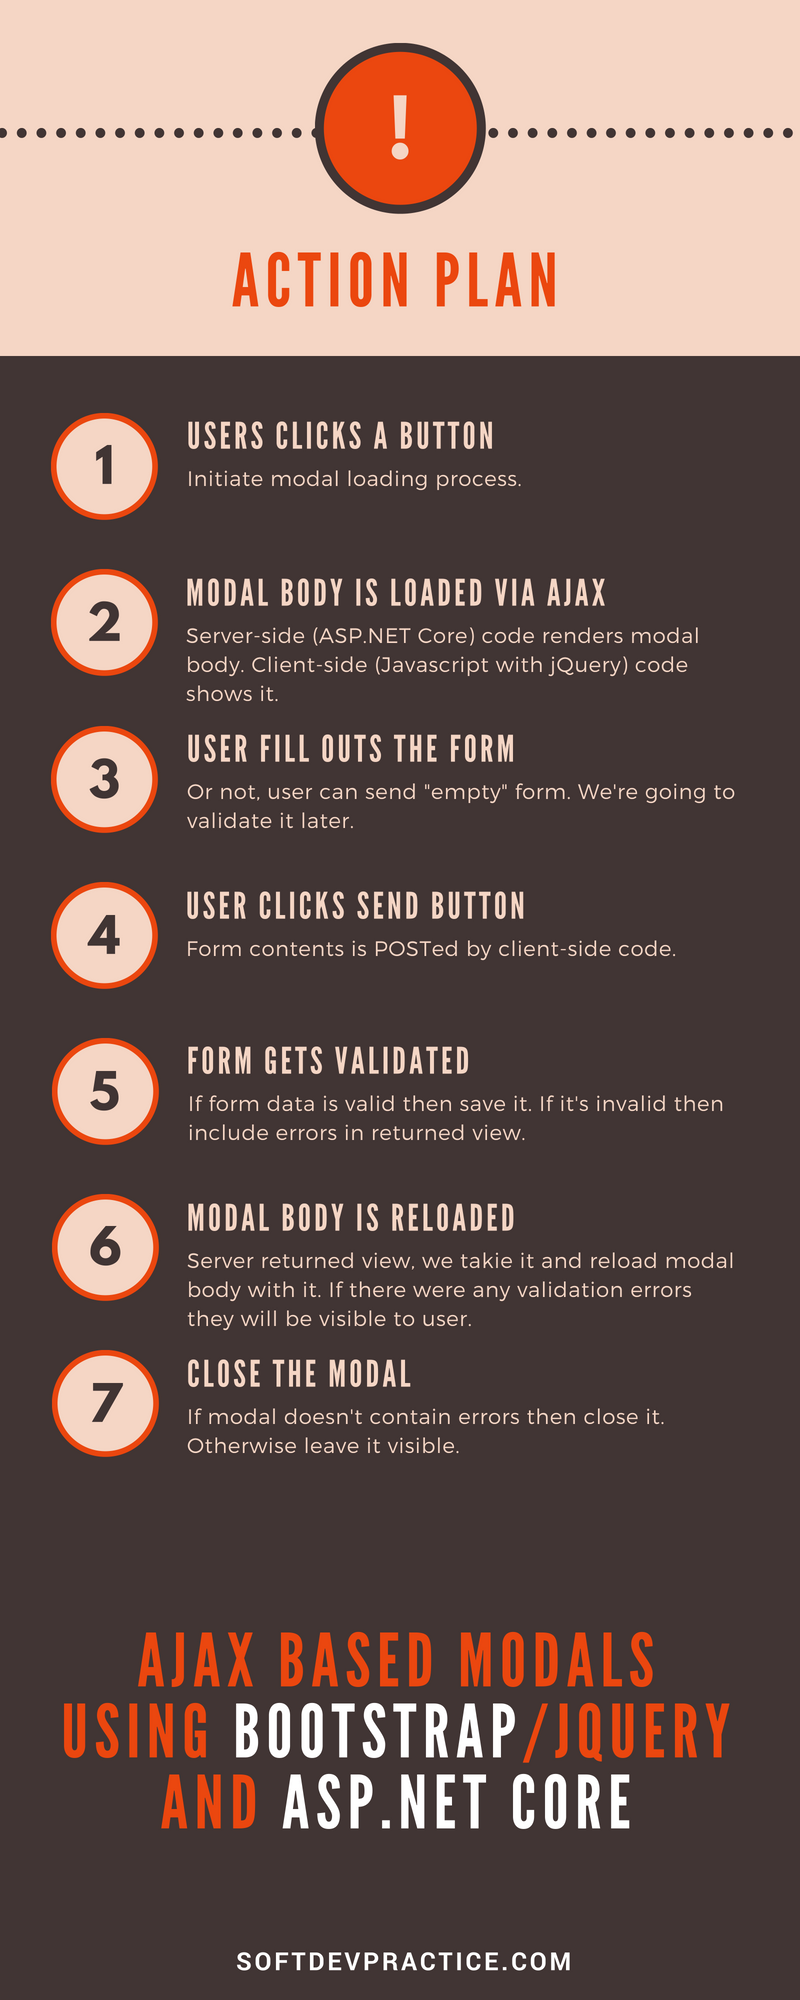 Action plan for Ajax based Bootstrap modals using ASP.NET Core infographics